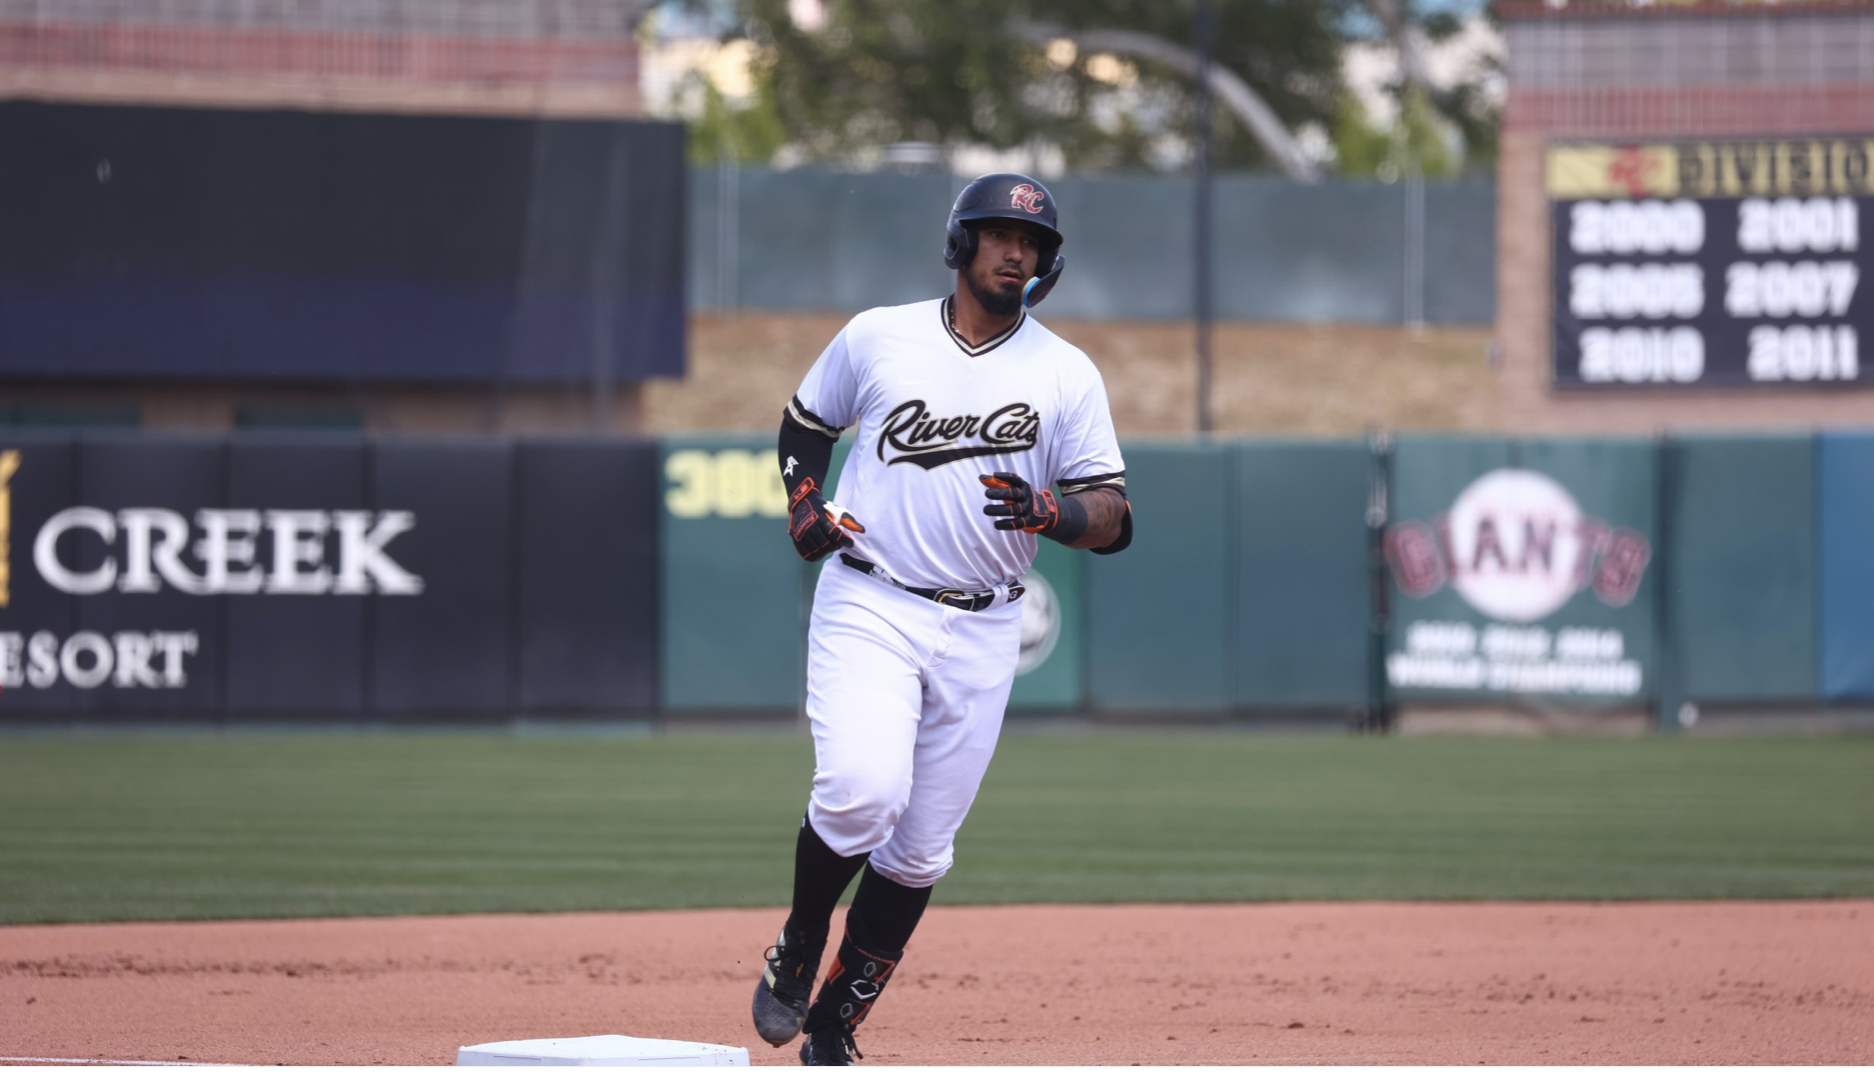 River Cats earn doubleheader split with 7-4 win